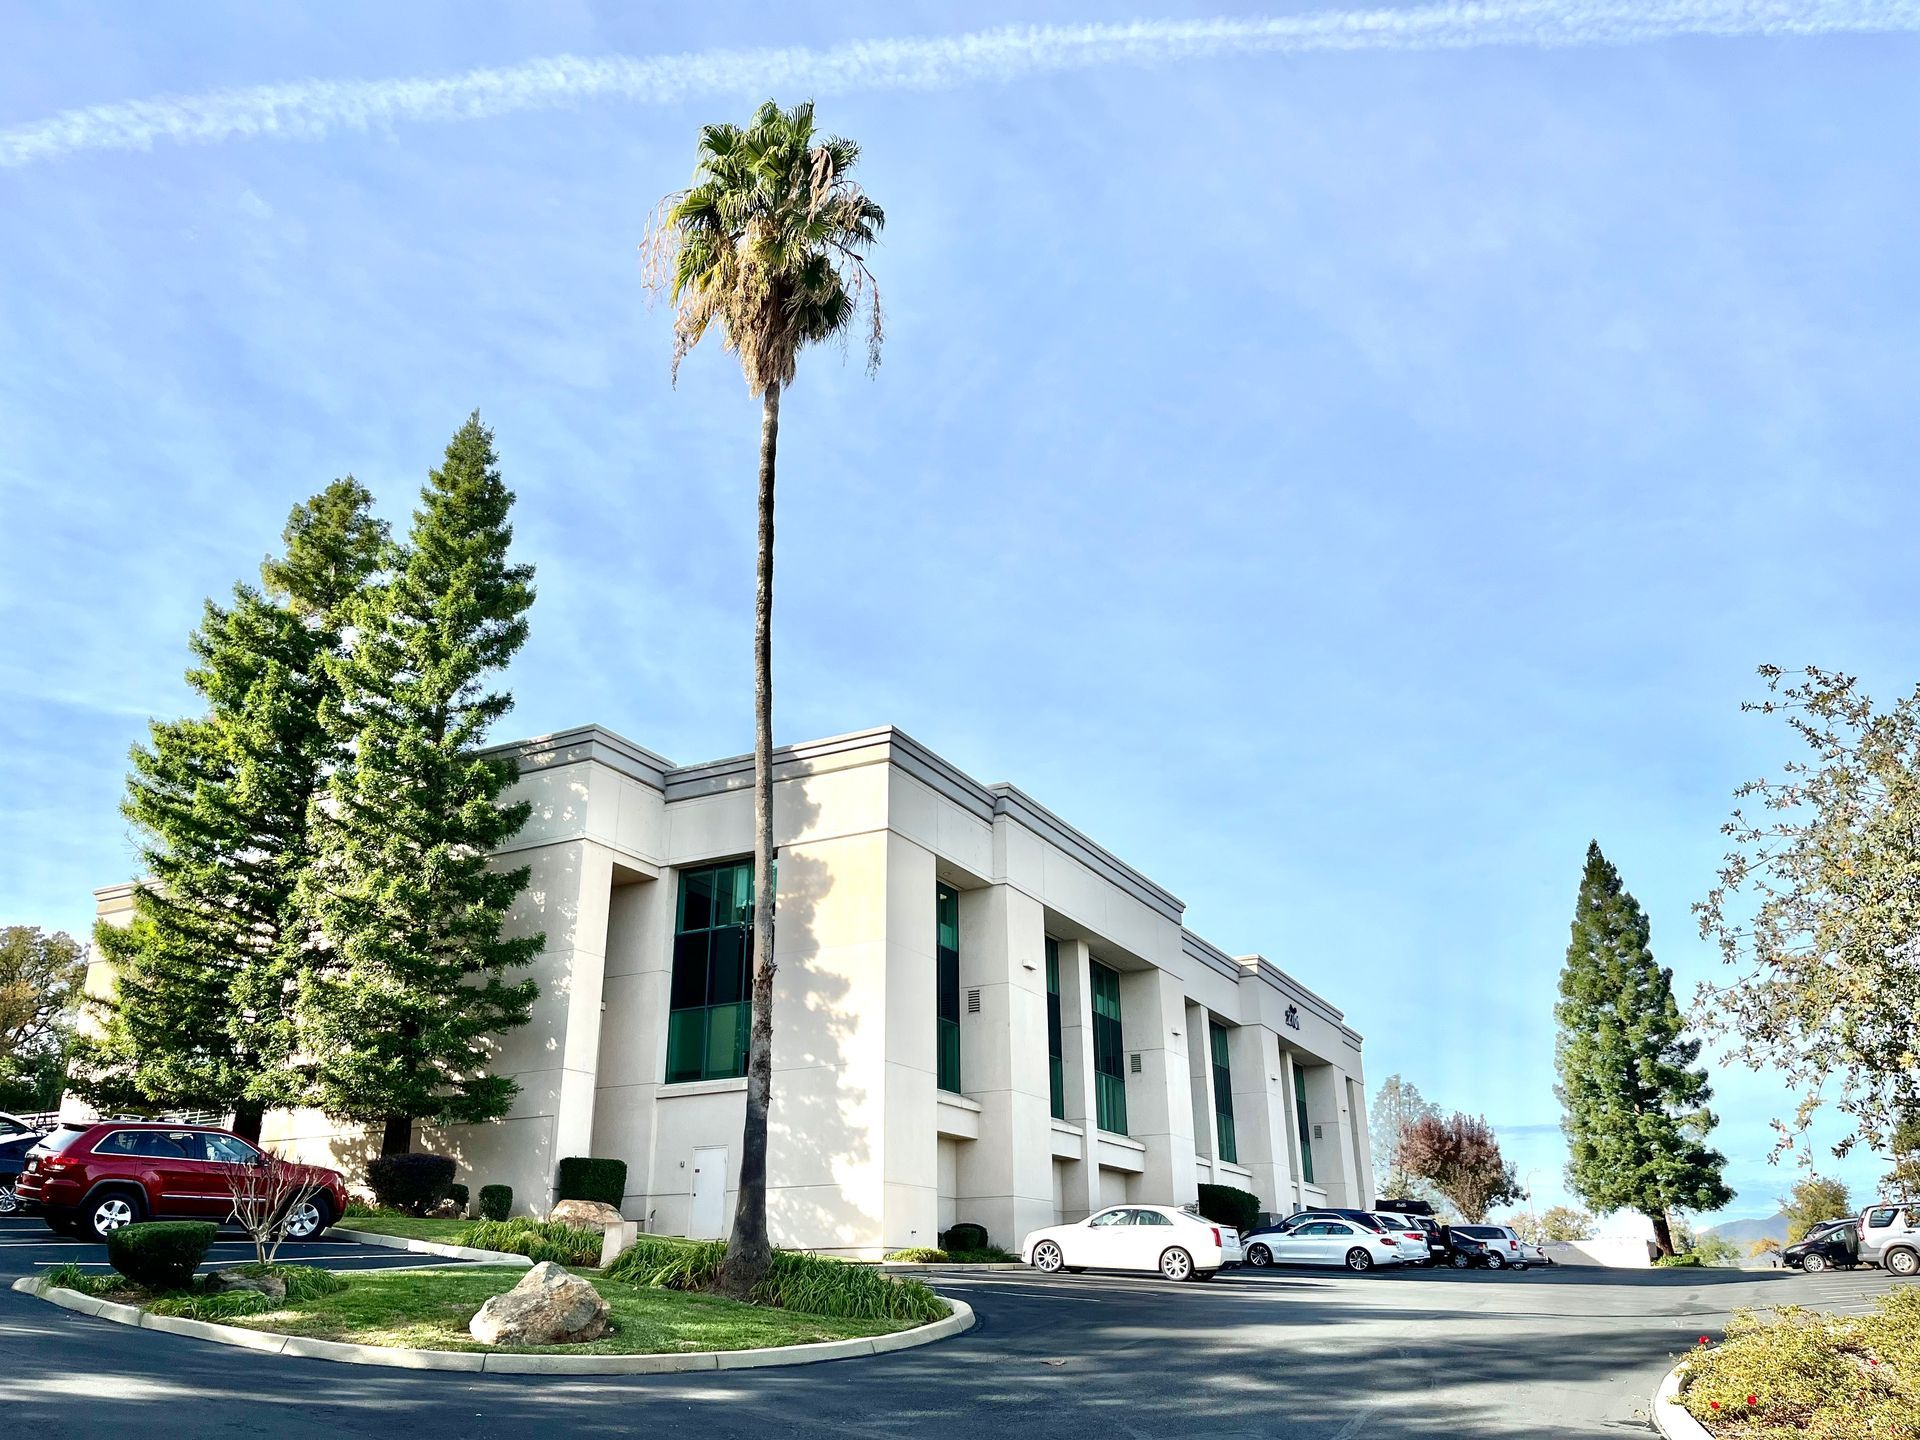 Photograph of the Pickering Law corporation building located in Redding California. 